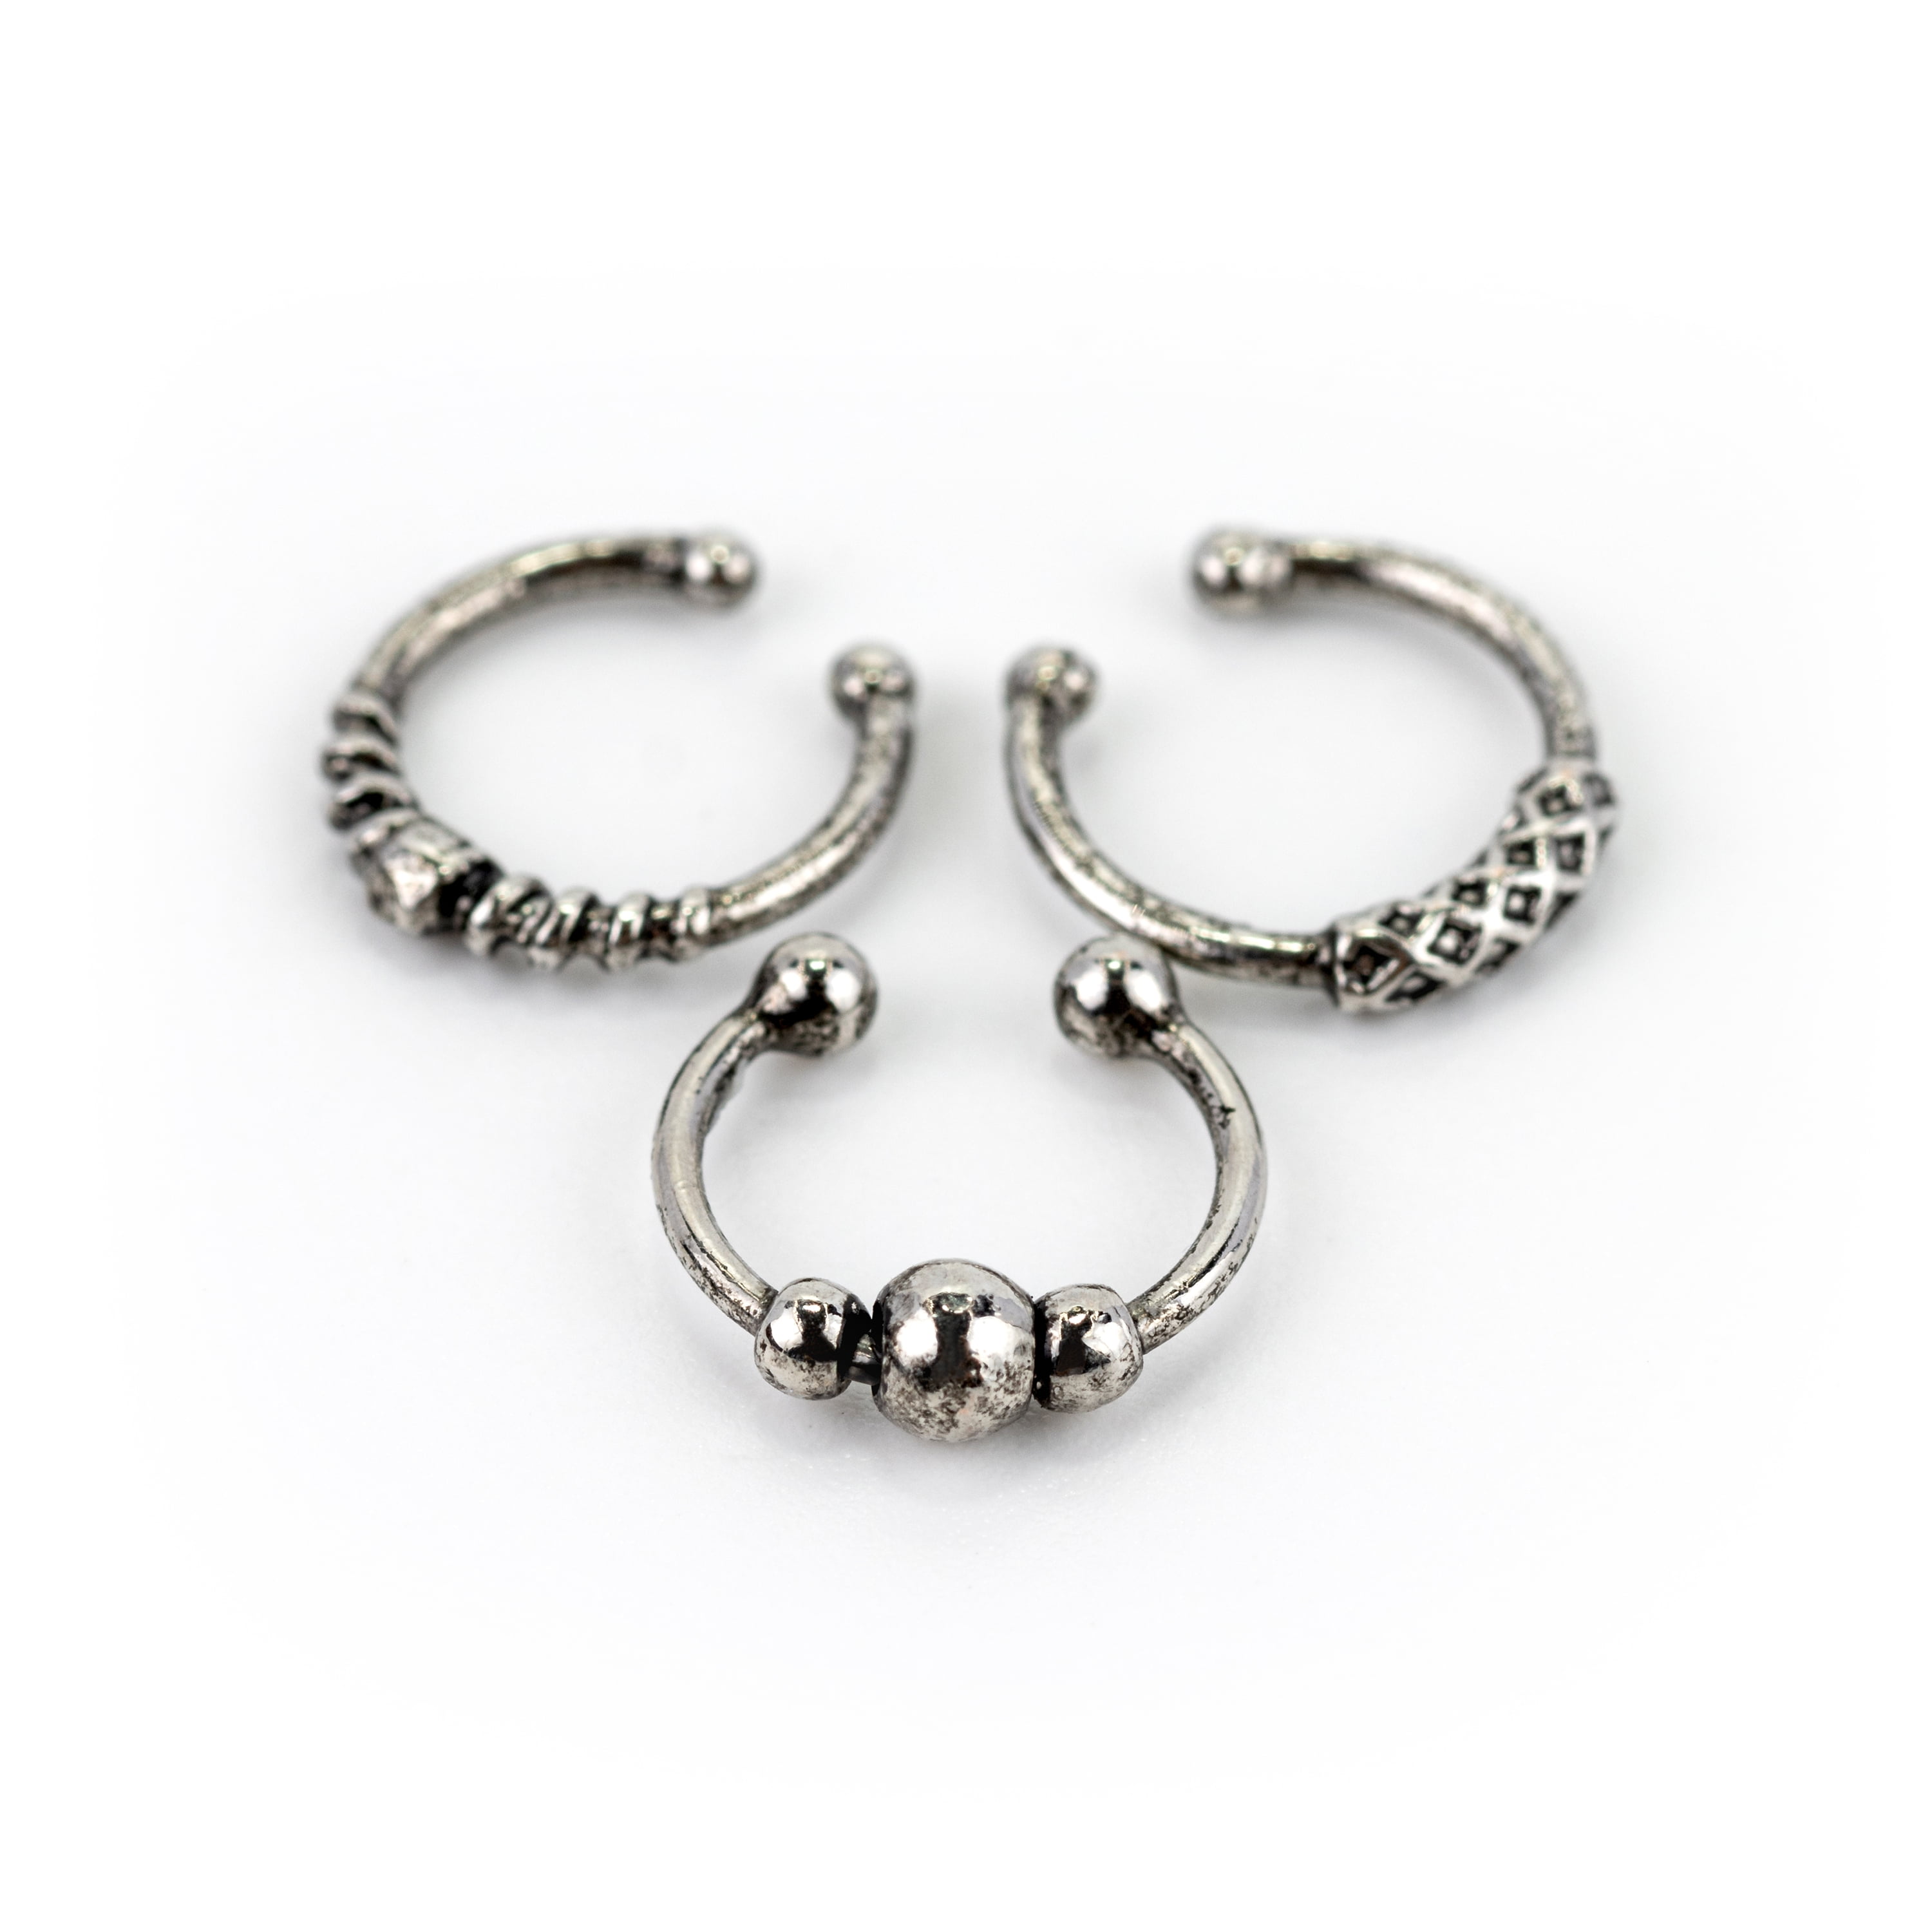 Claire's Women's Silver Beaded Bar Hoop Nose Rings, Stainless Steel, 3 Pack, - Walmart.com